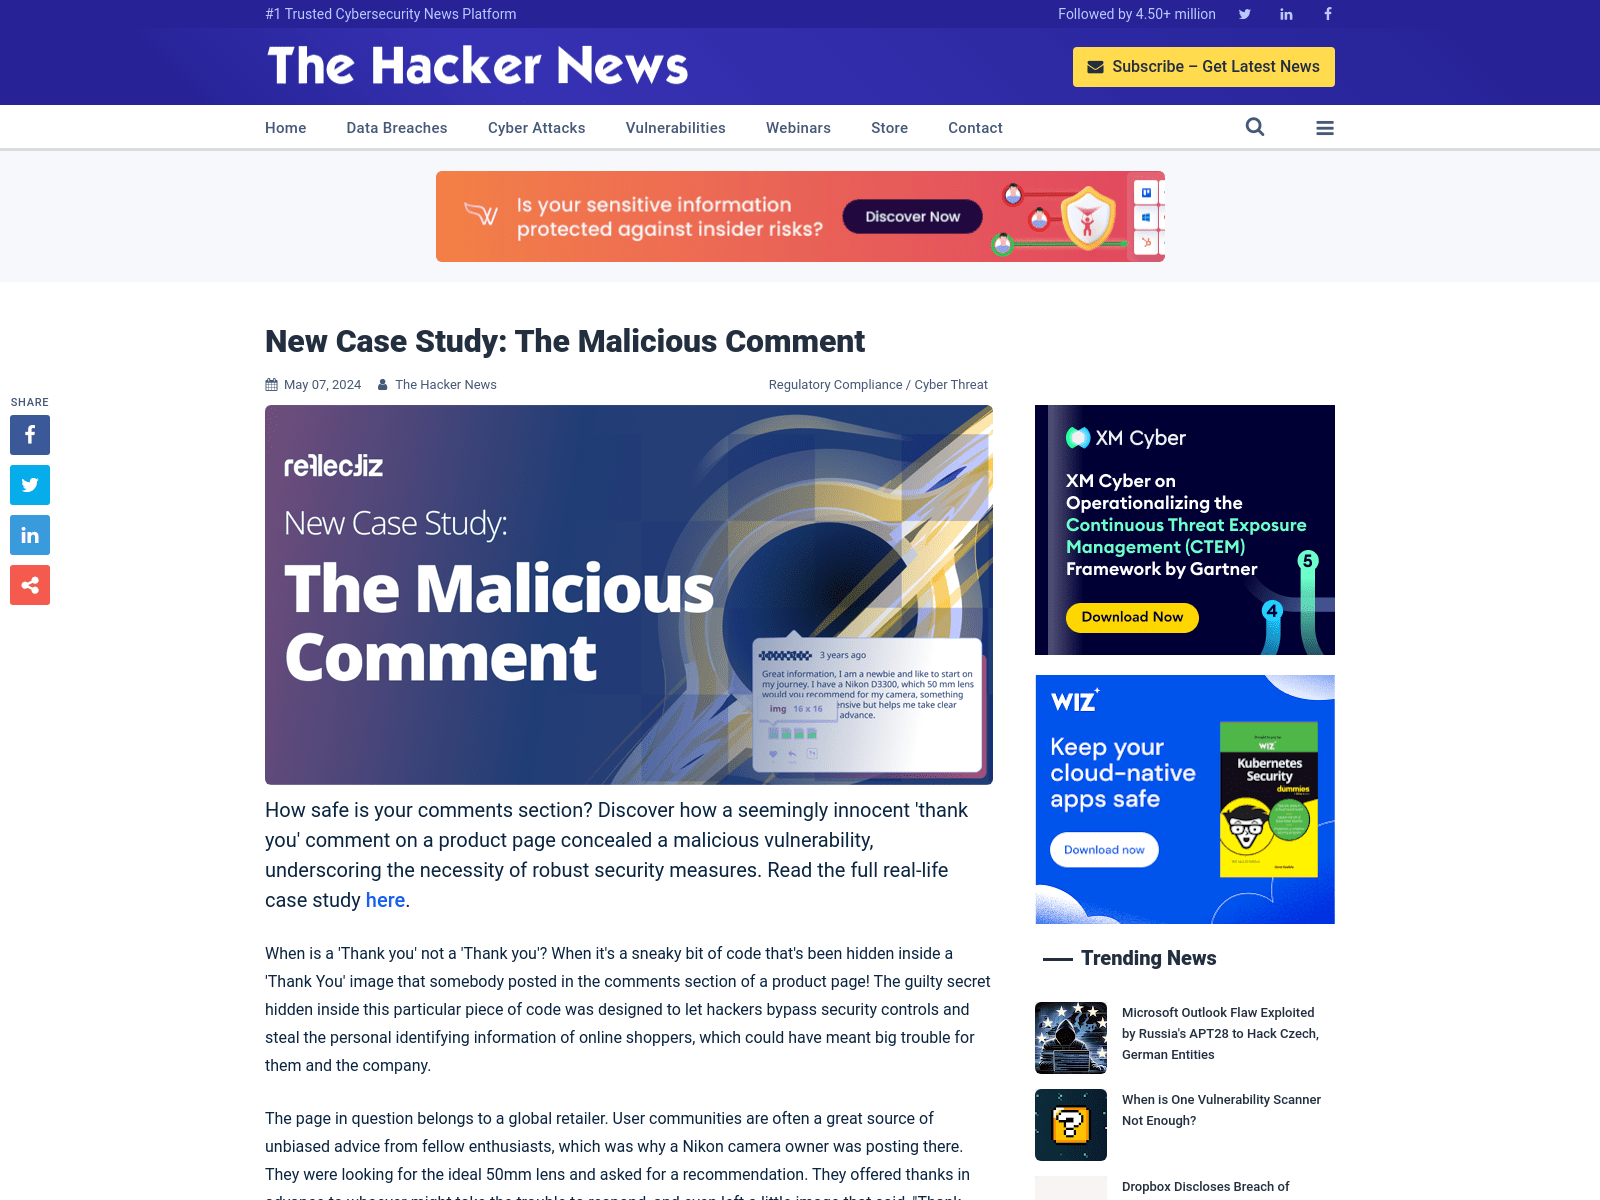 New Case Study: The Malicious Comment